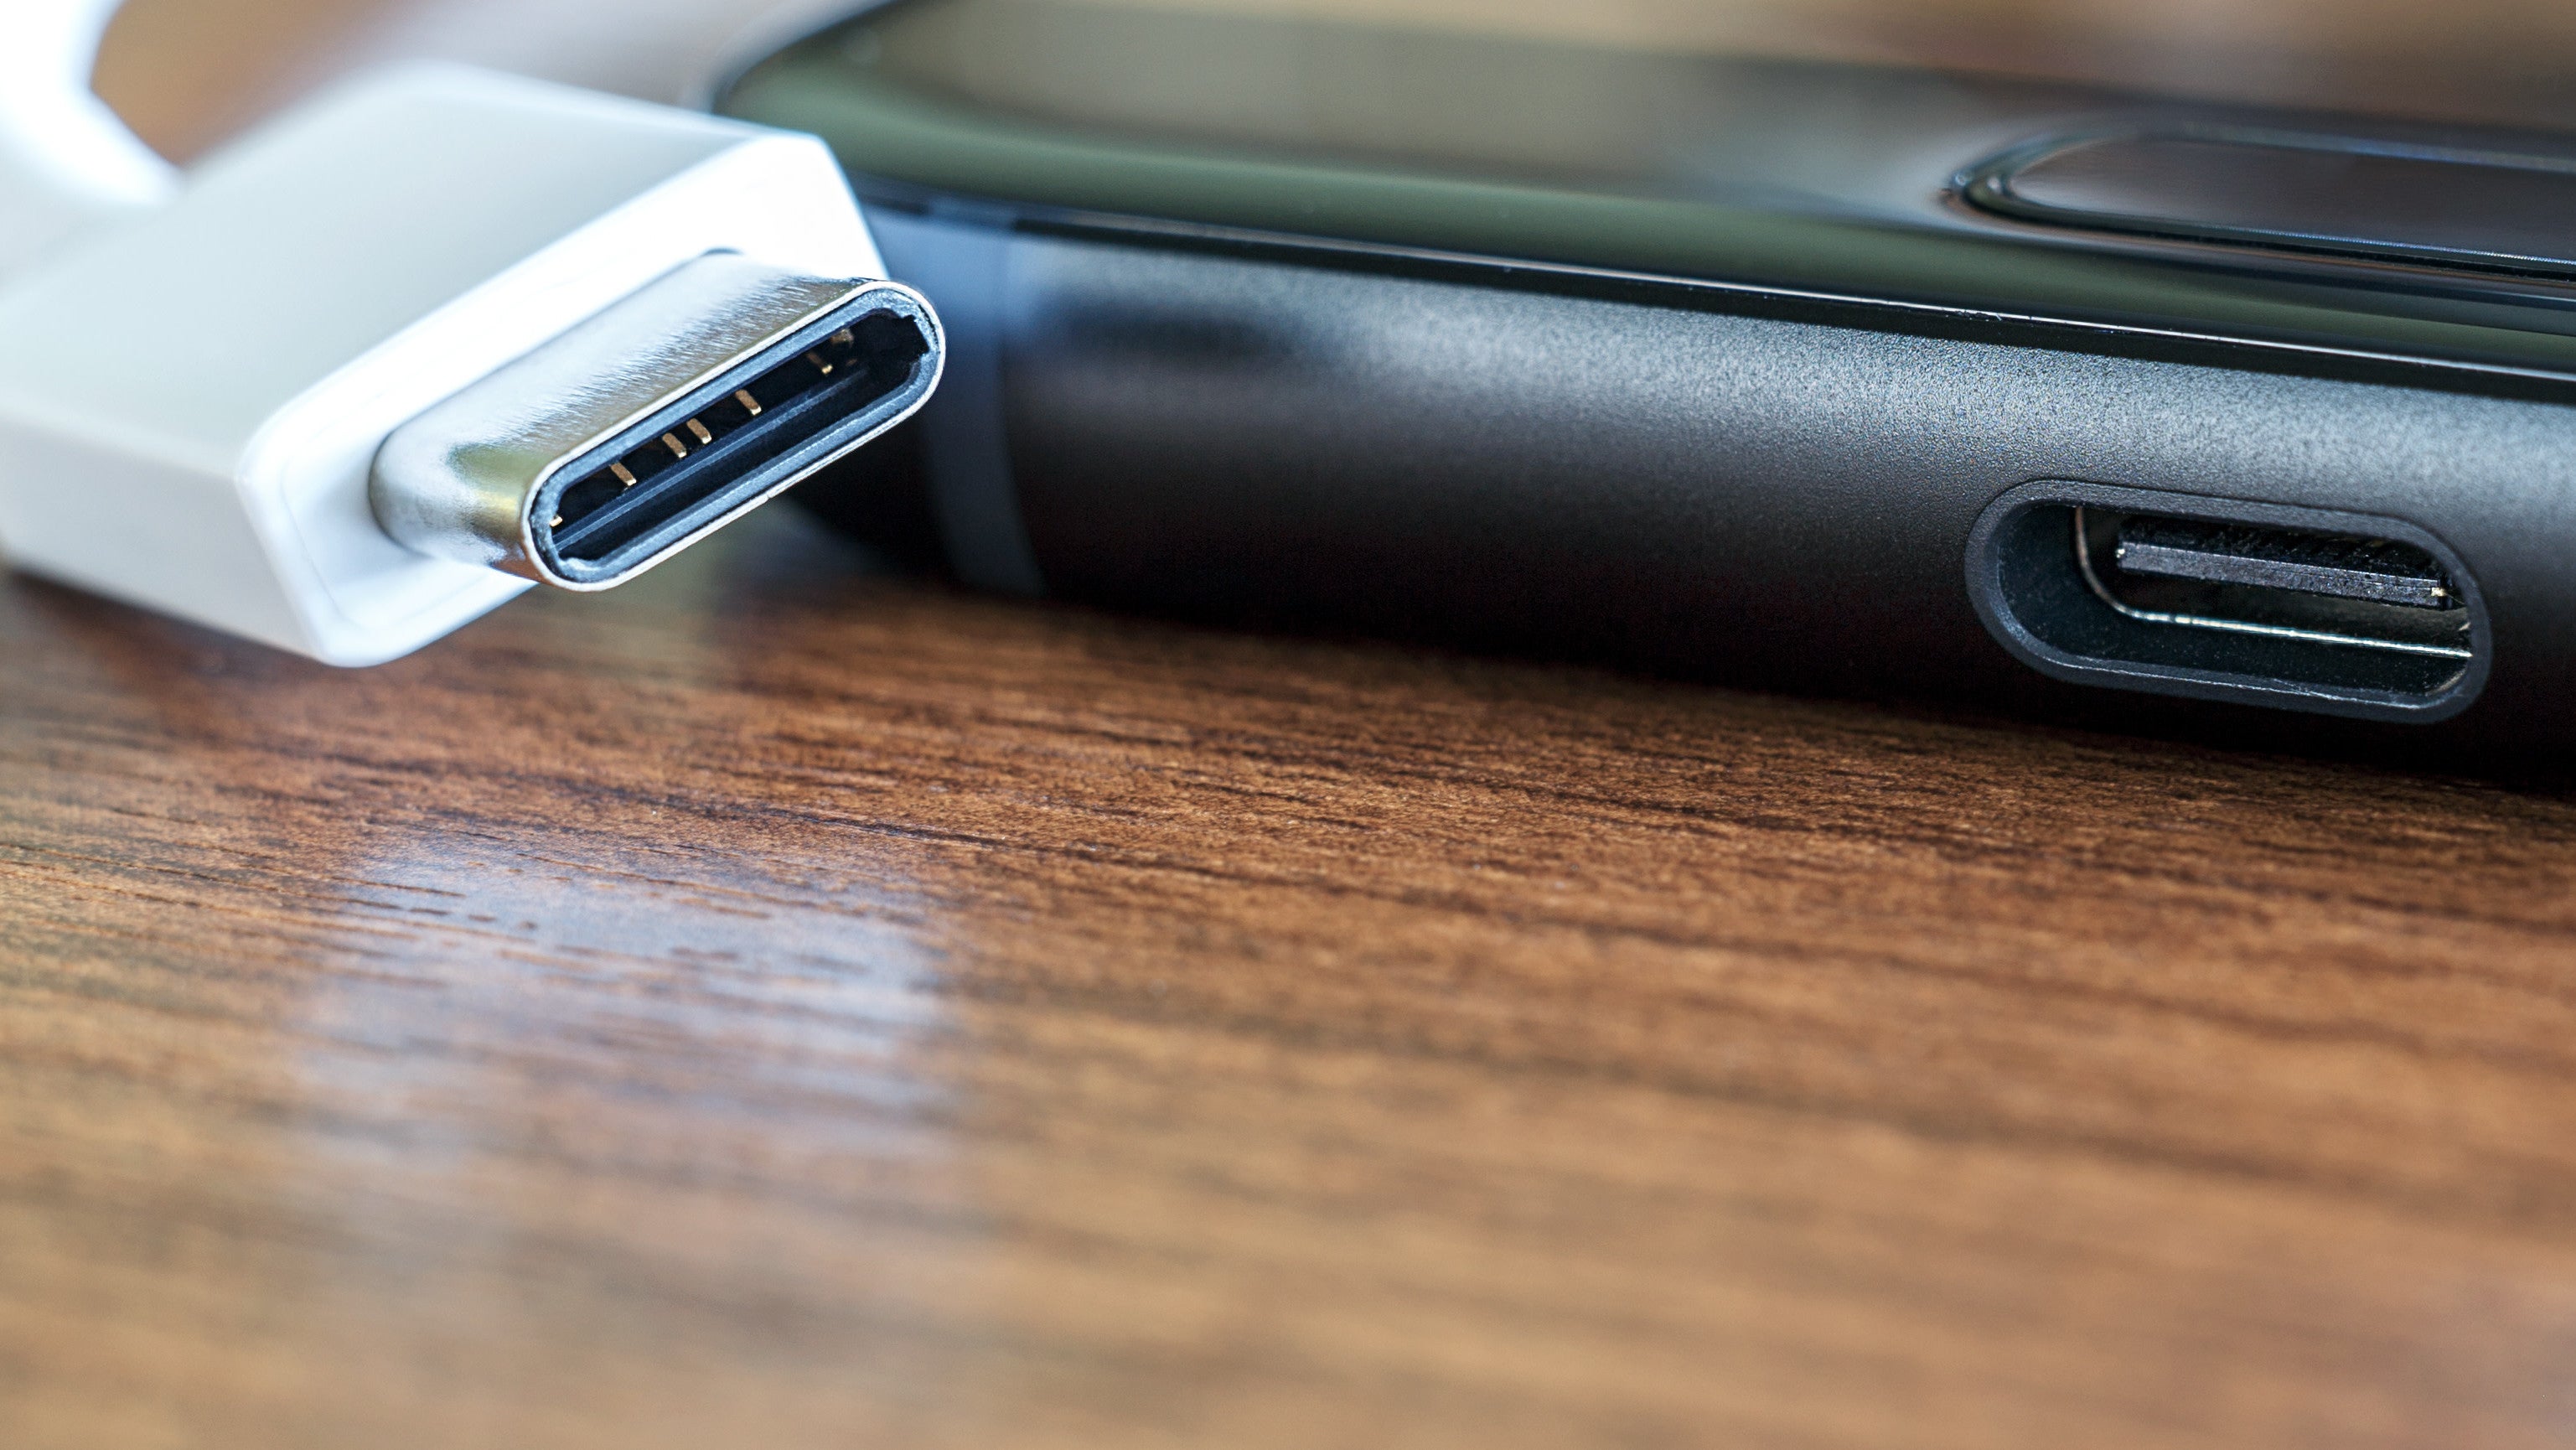 What Is ‘USB Fast Charging’ And Why Does It Matter For Your Smartphone?